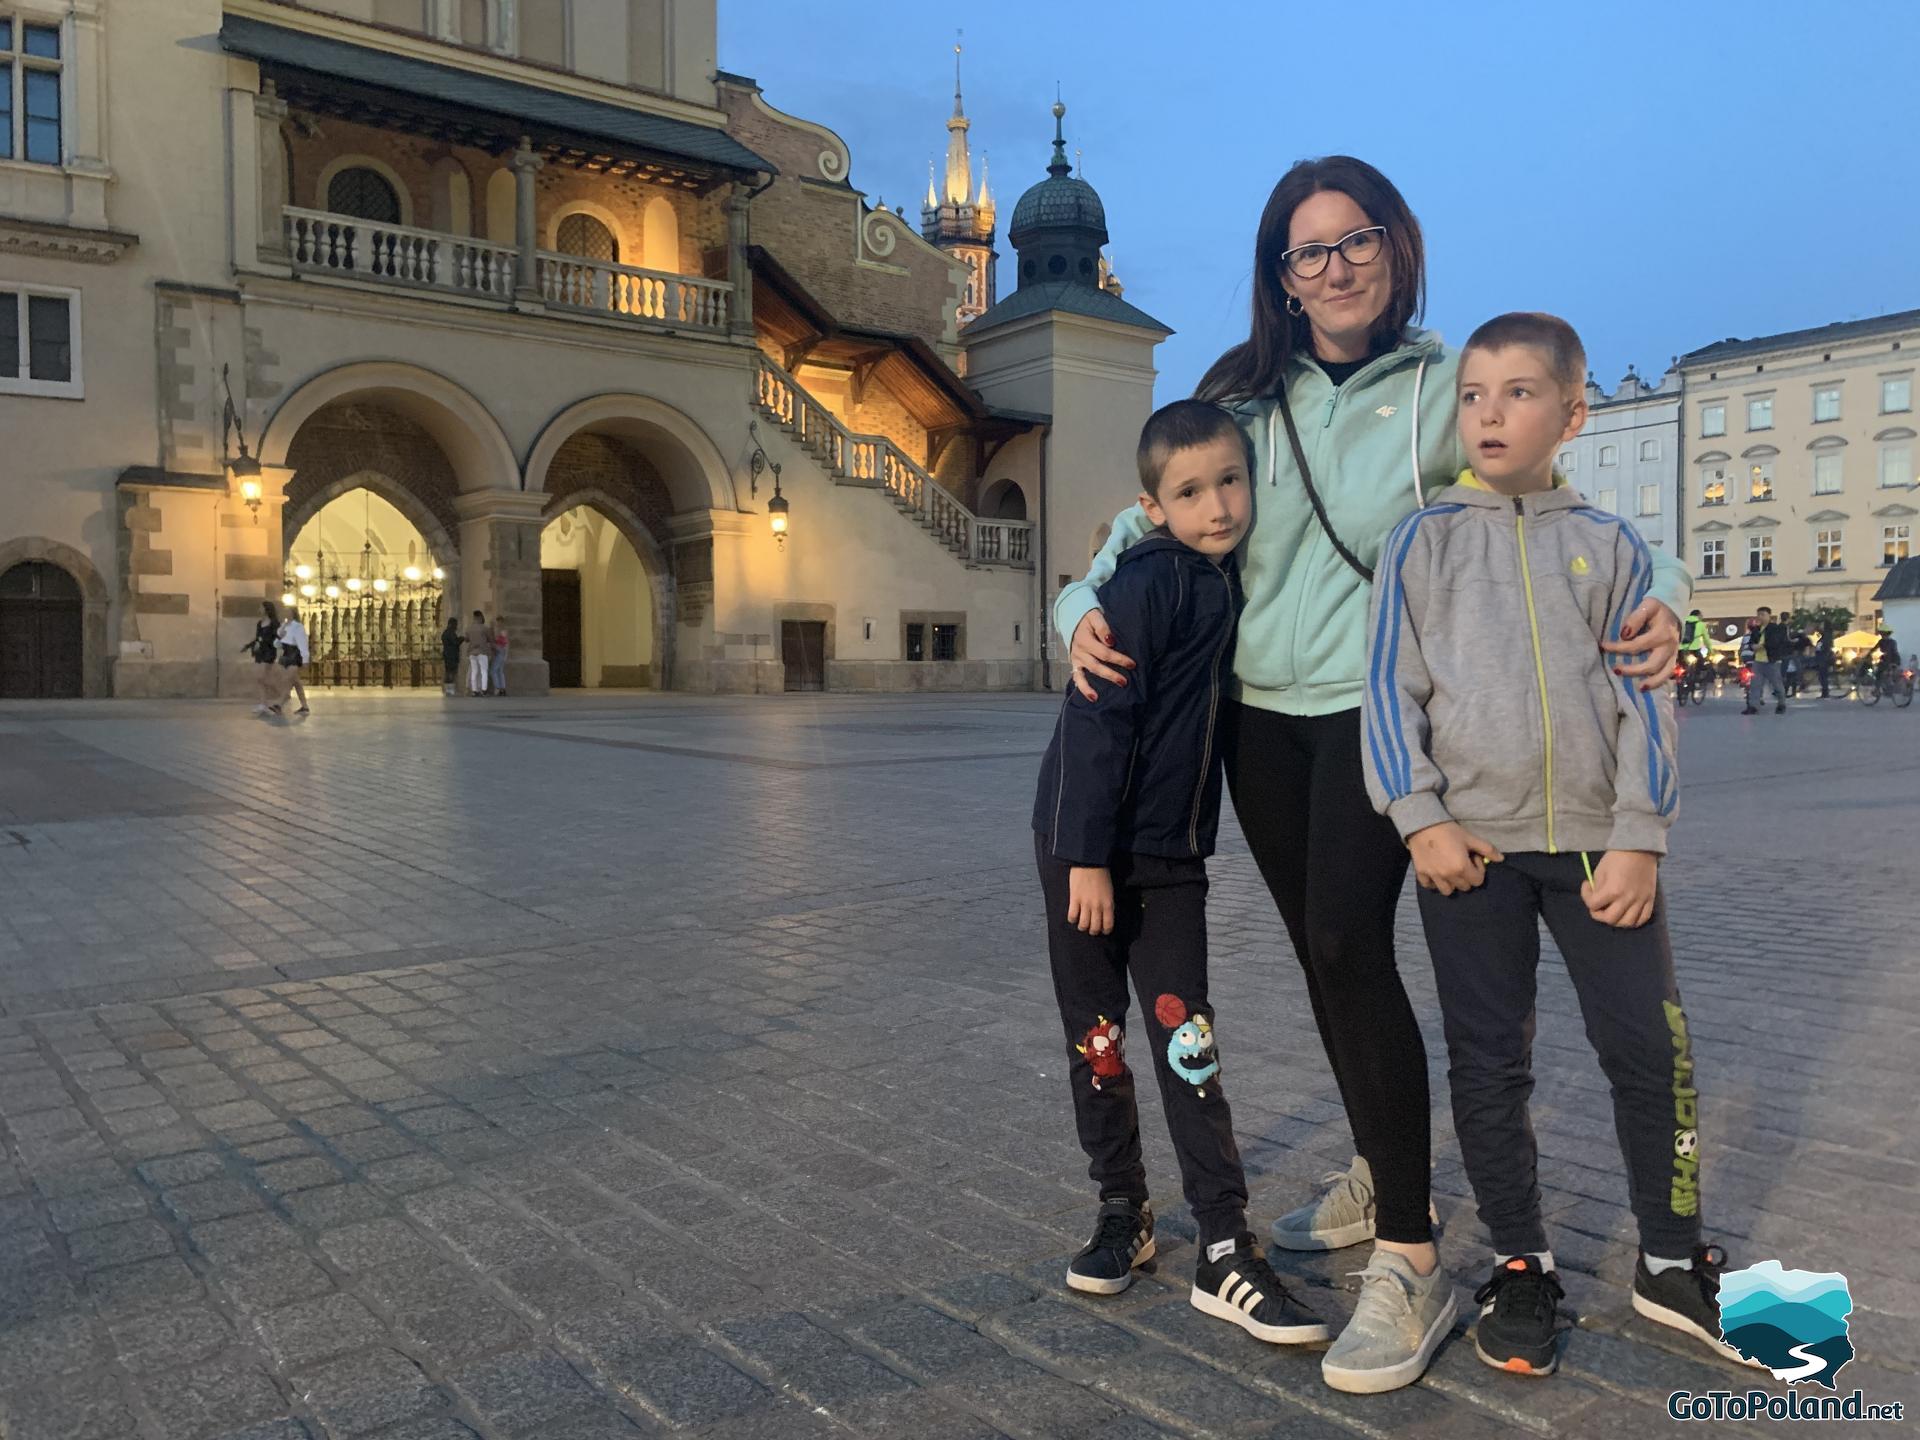 it is evening, a woman and two kids are standing in front of the Cloth Hall 